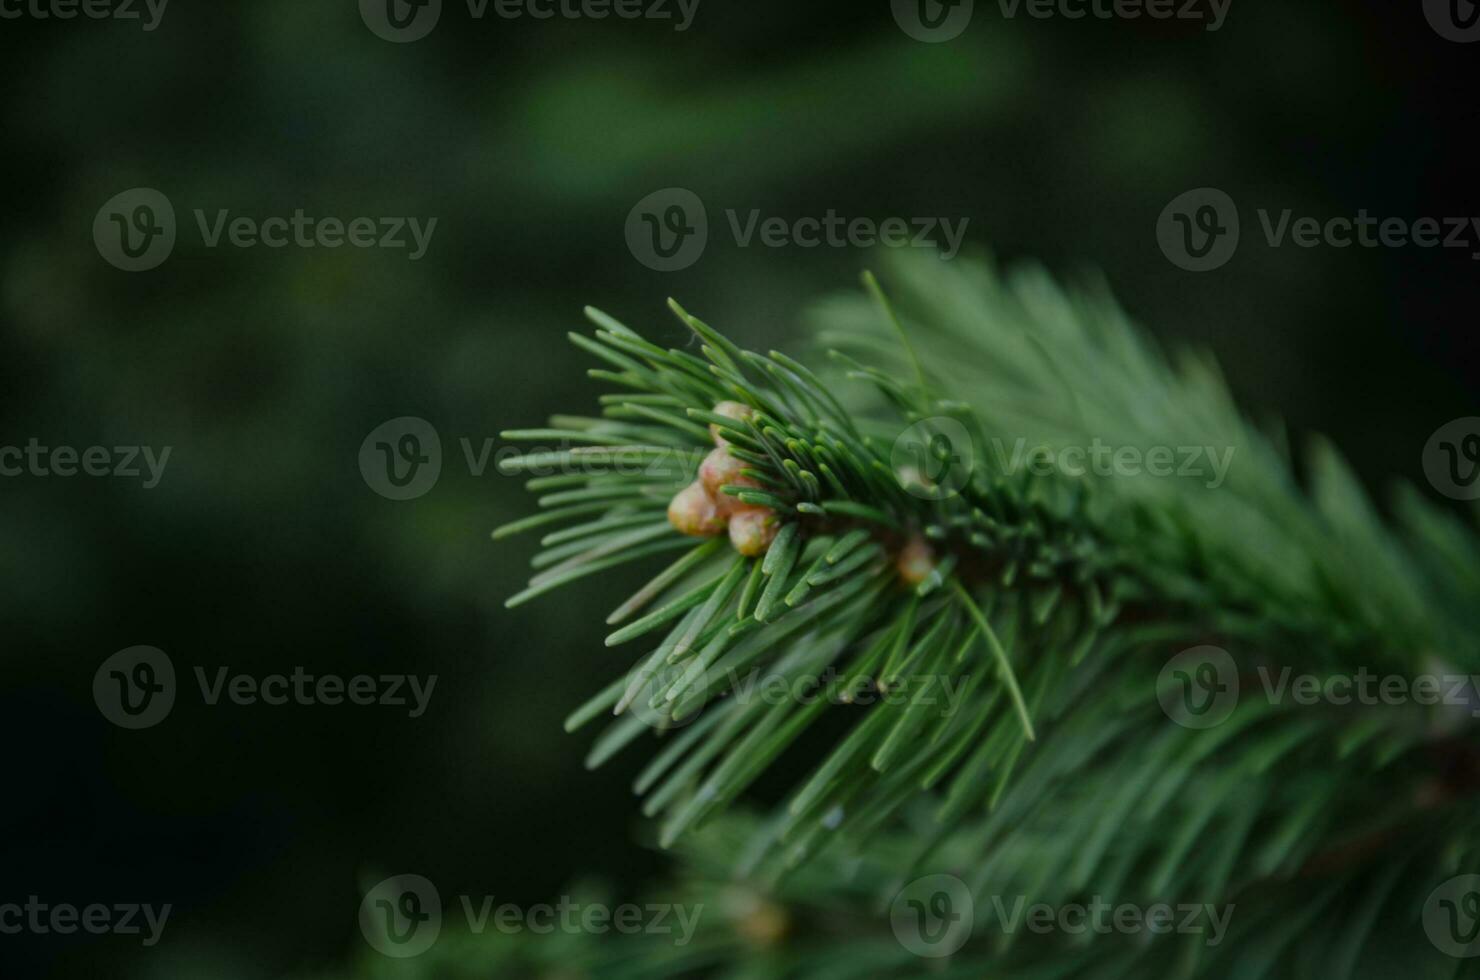 green background from a spruce branch with buds. photo